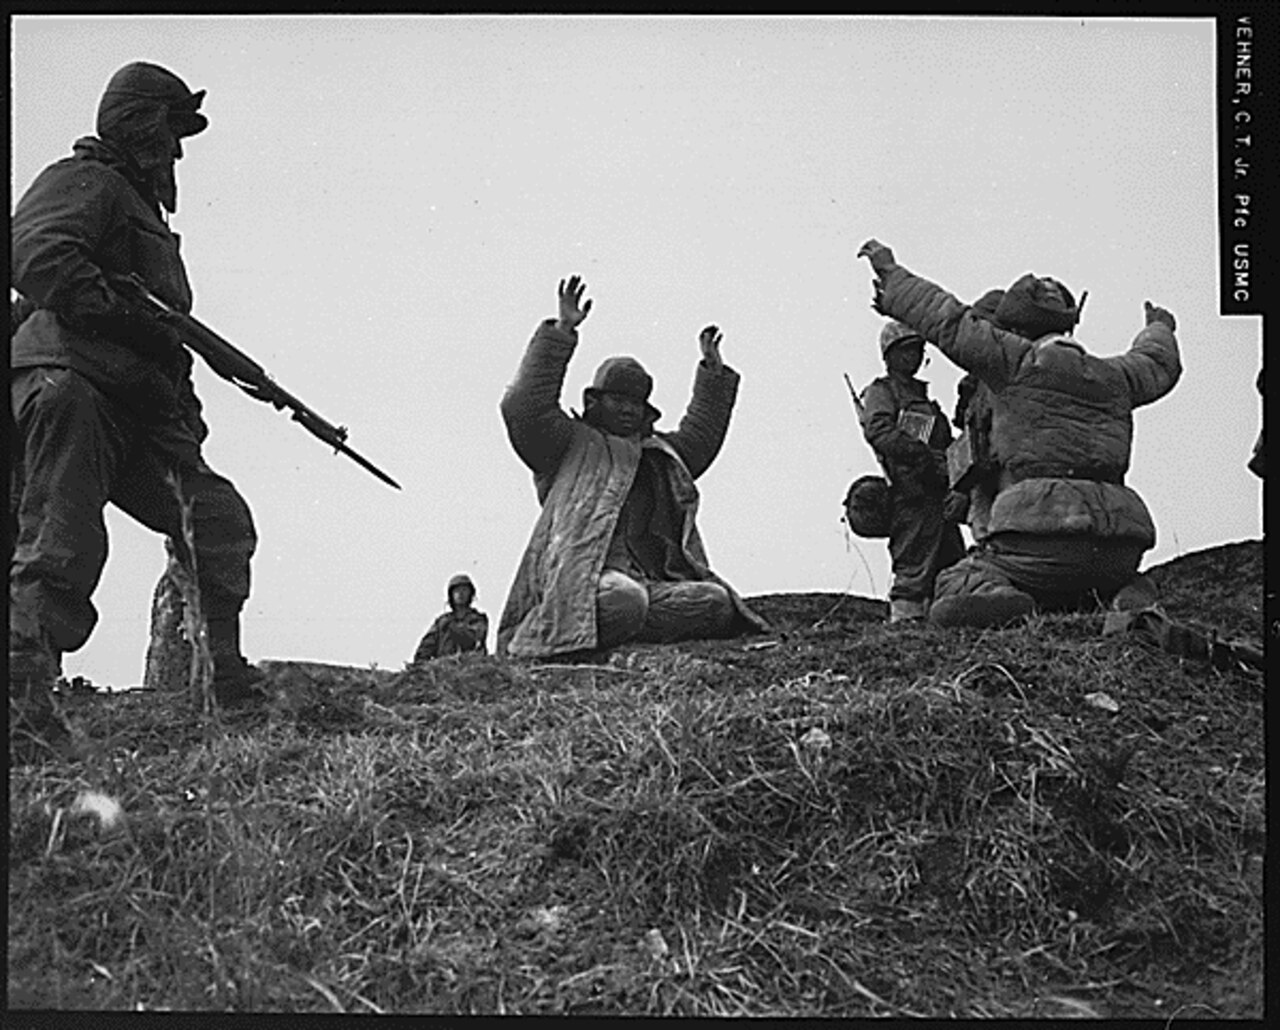 A man points a rifle at two other men who have their hands up.